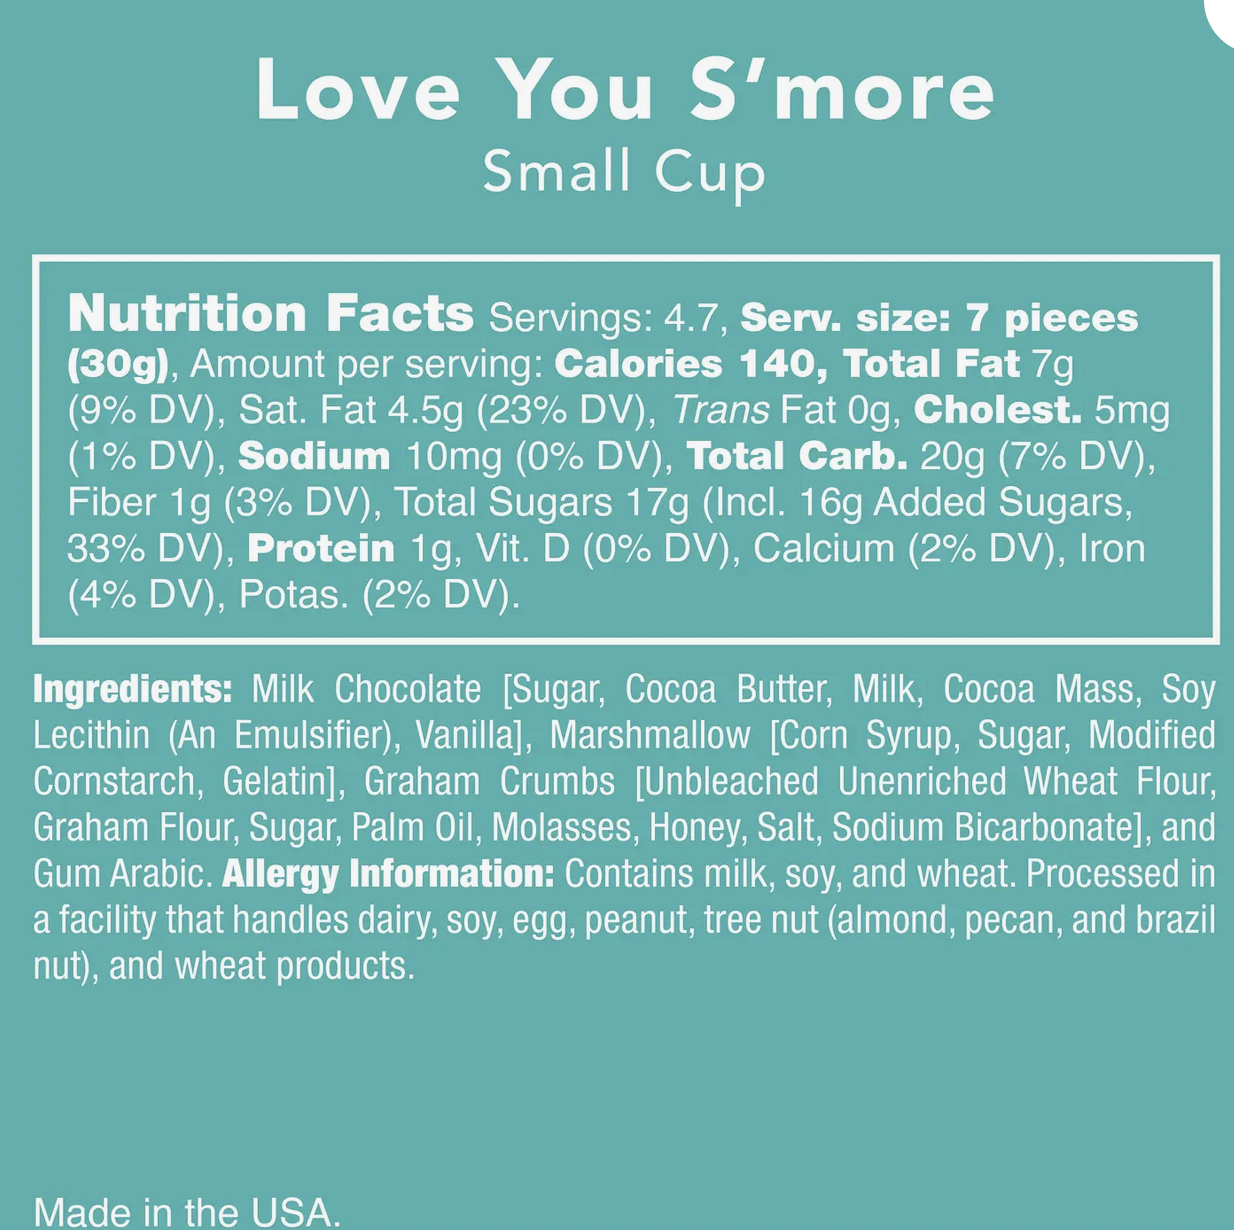 Candy-Love You S'more